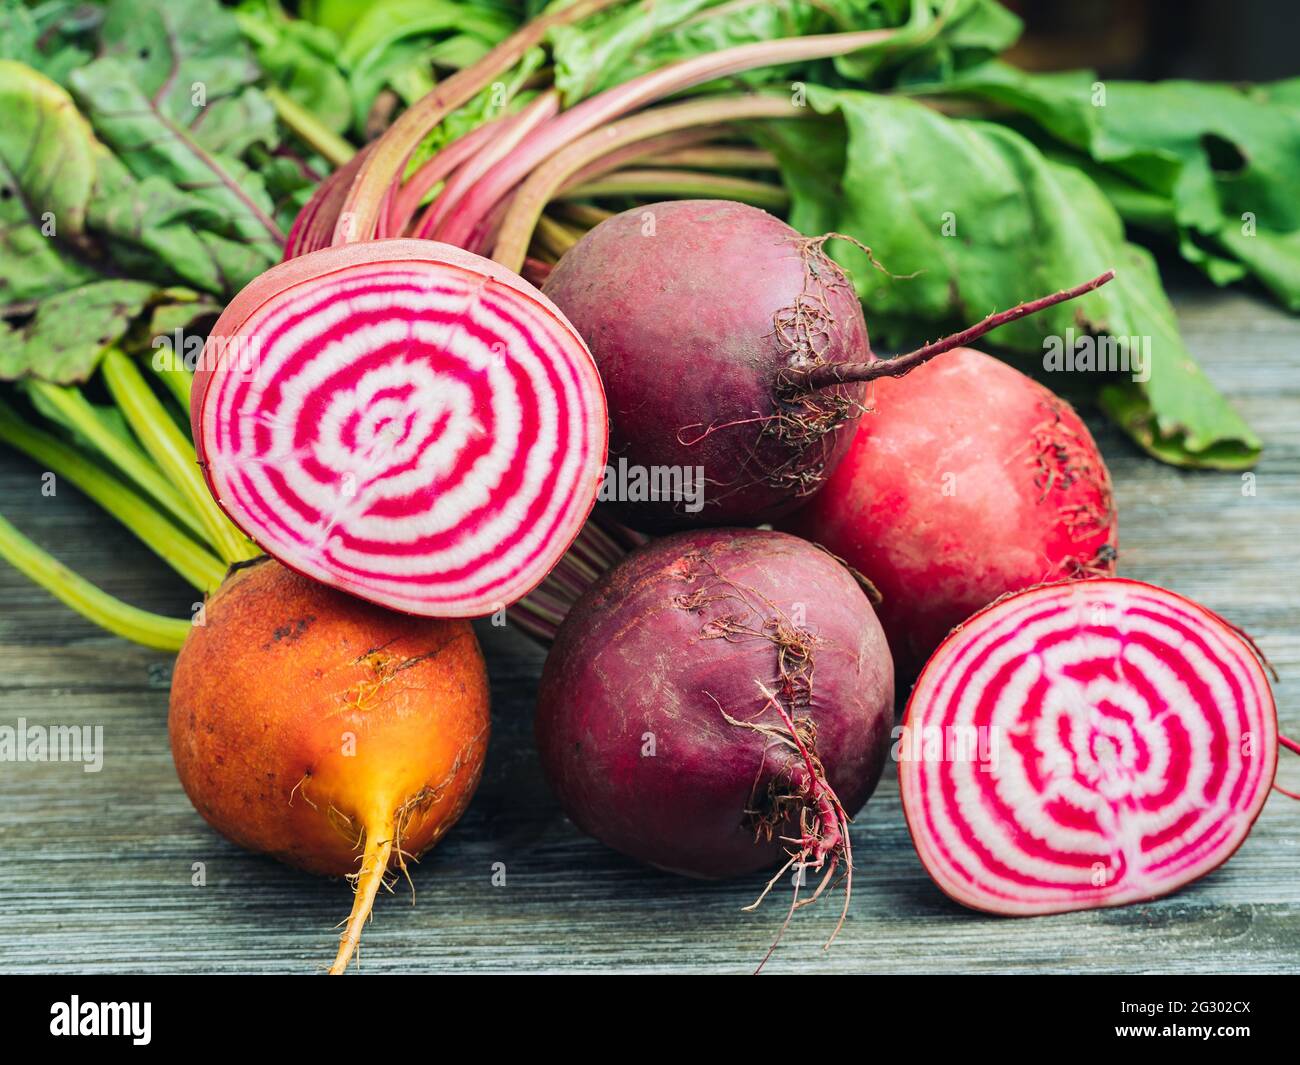 Bunch of fresh organic beet roots on a wooden table. Stock Photo